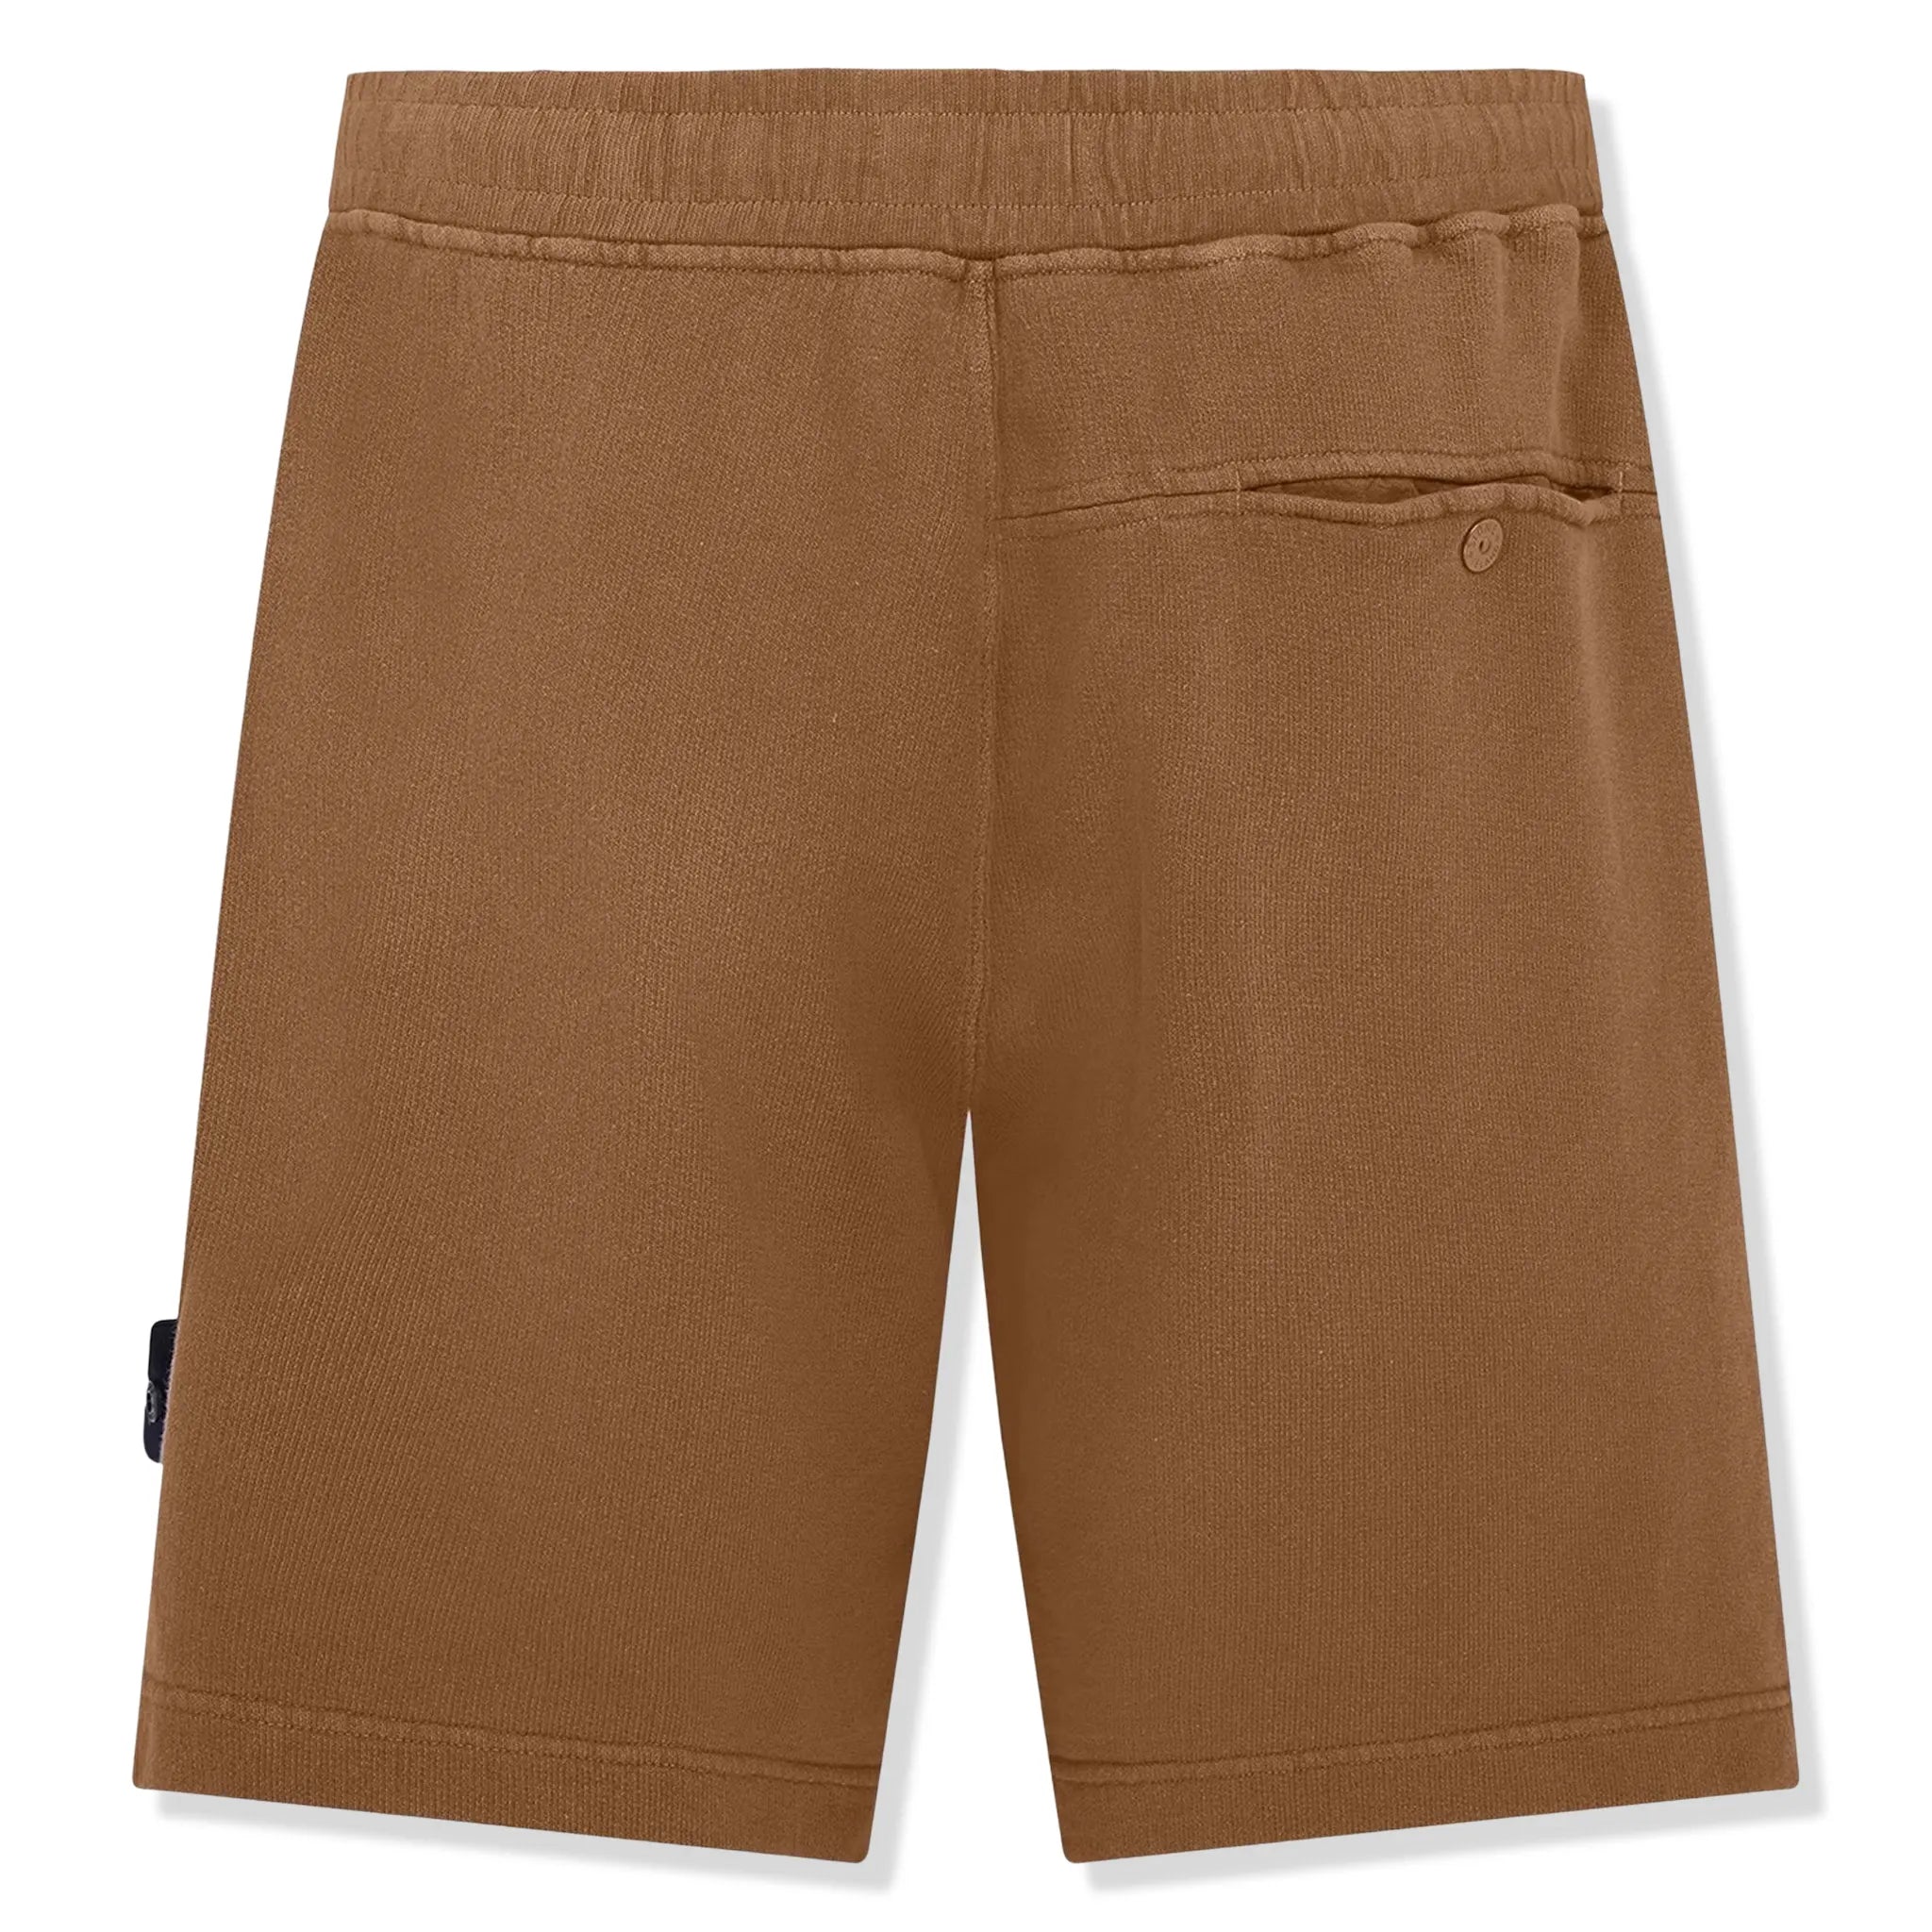 Back view of Stone Island Cotton Loop Brown Shorts